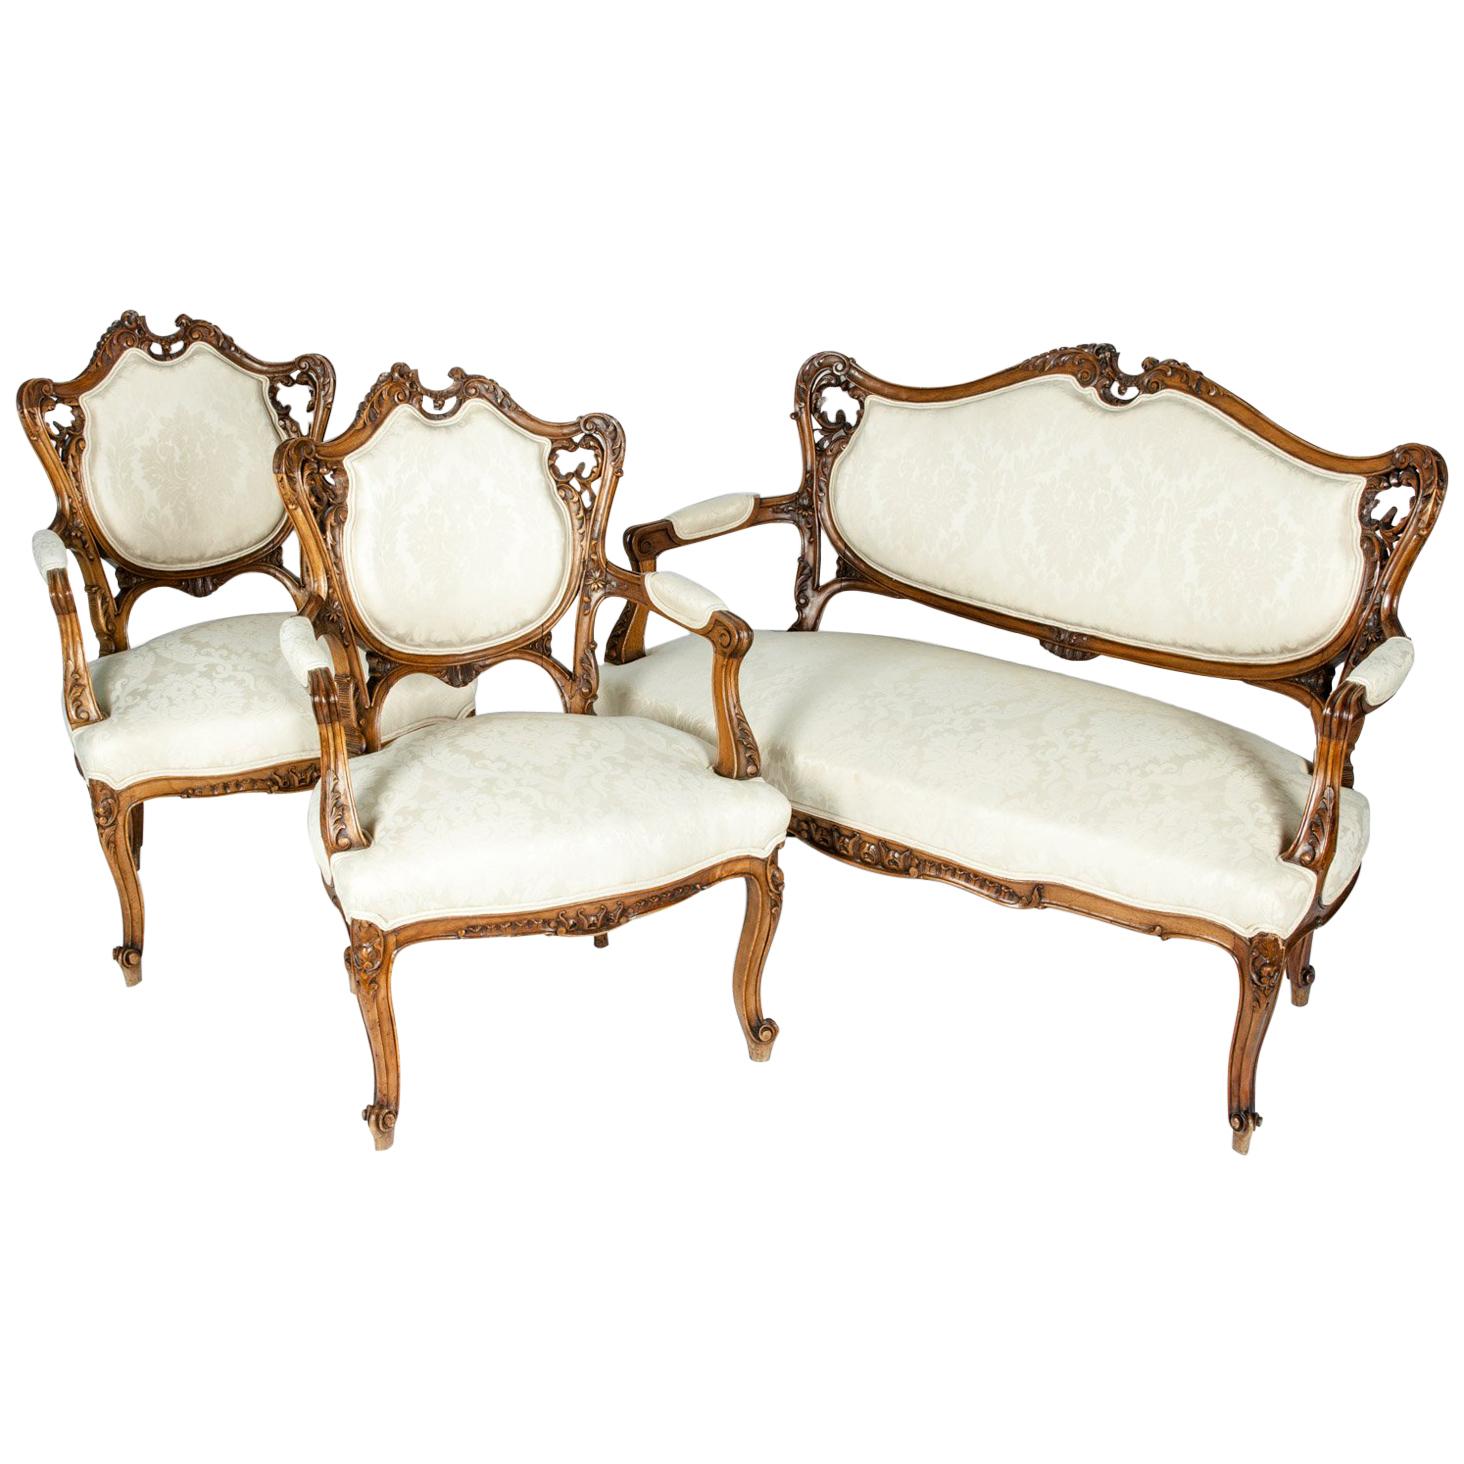 Vintage French Seating Three-Piece Set